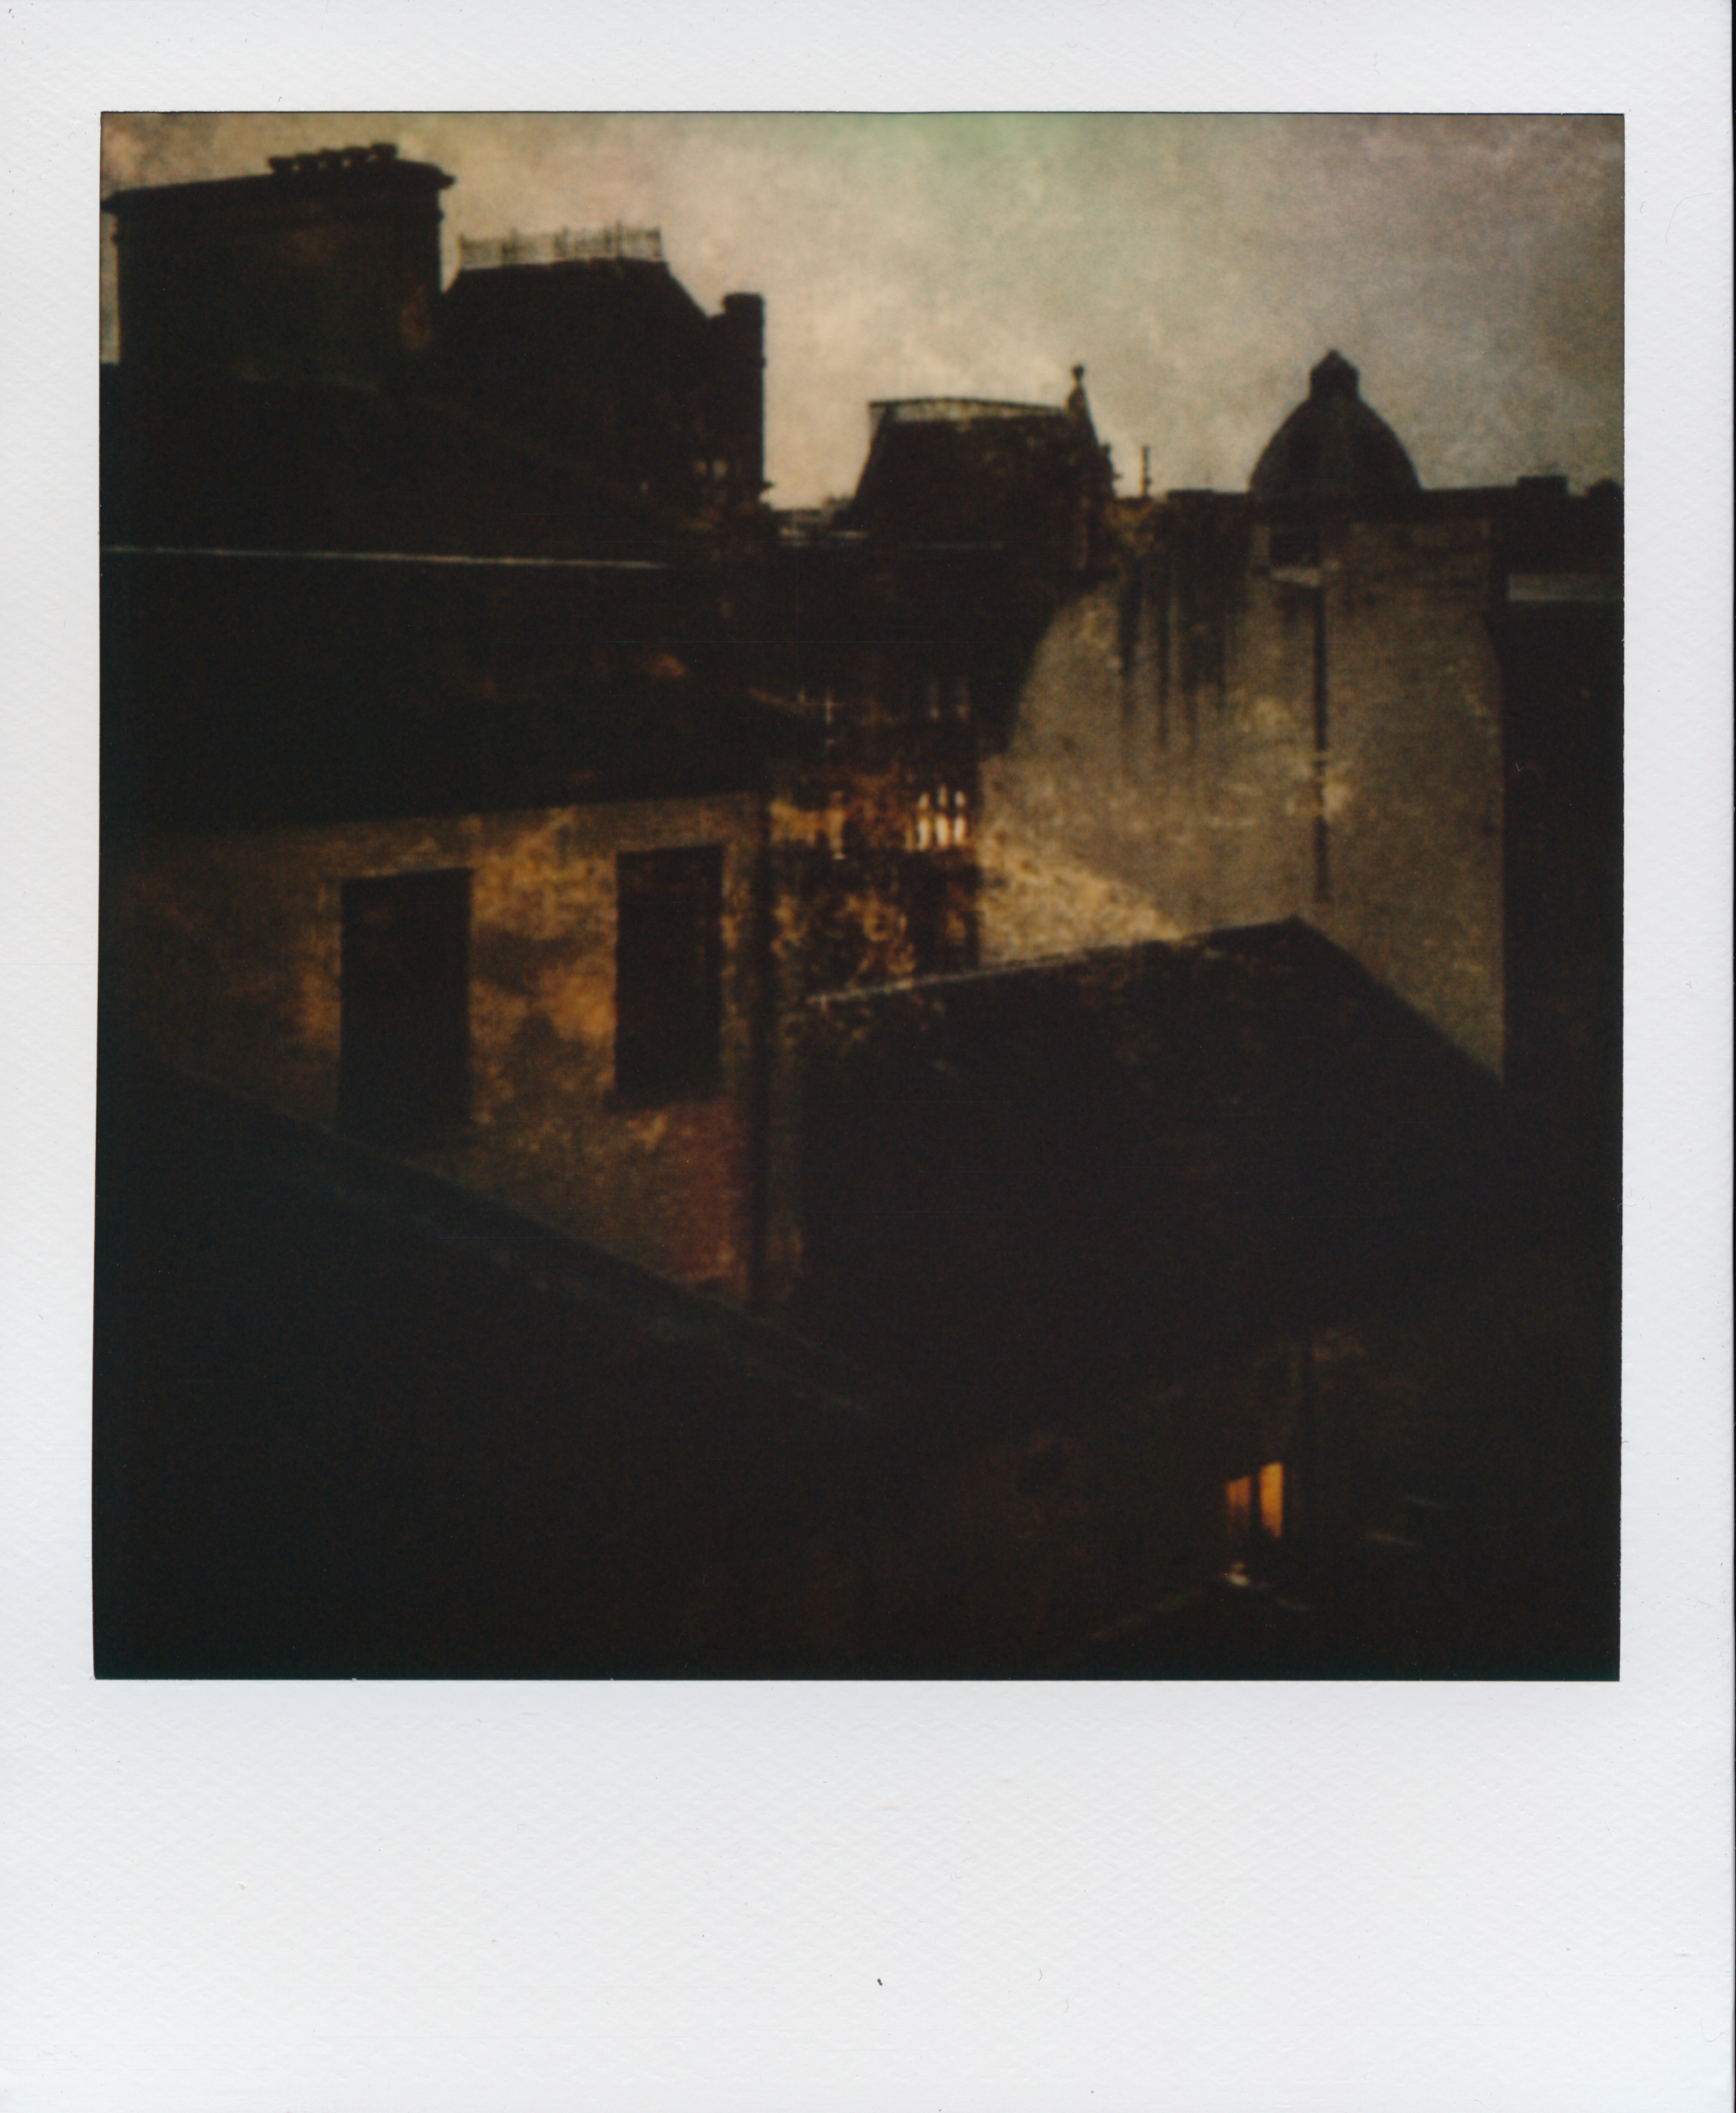 Glasgow By Night | Impossible Project Instant Lab | Impossible Project 70 Color Film | Per Forsström